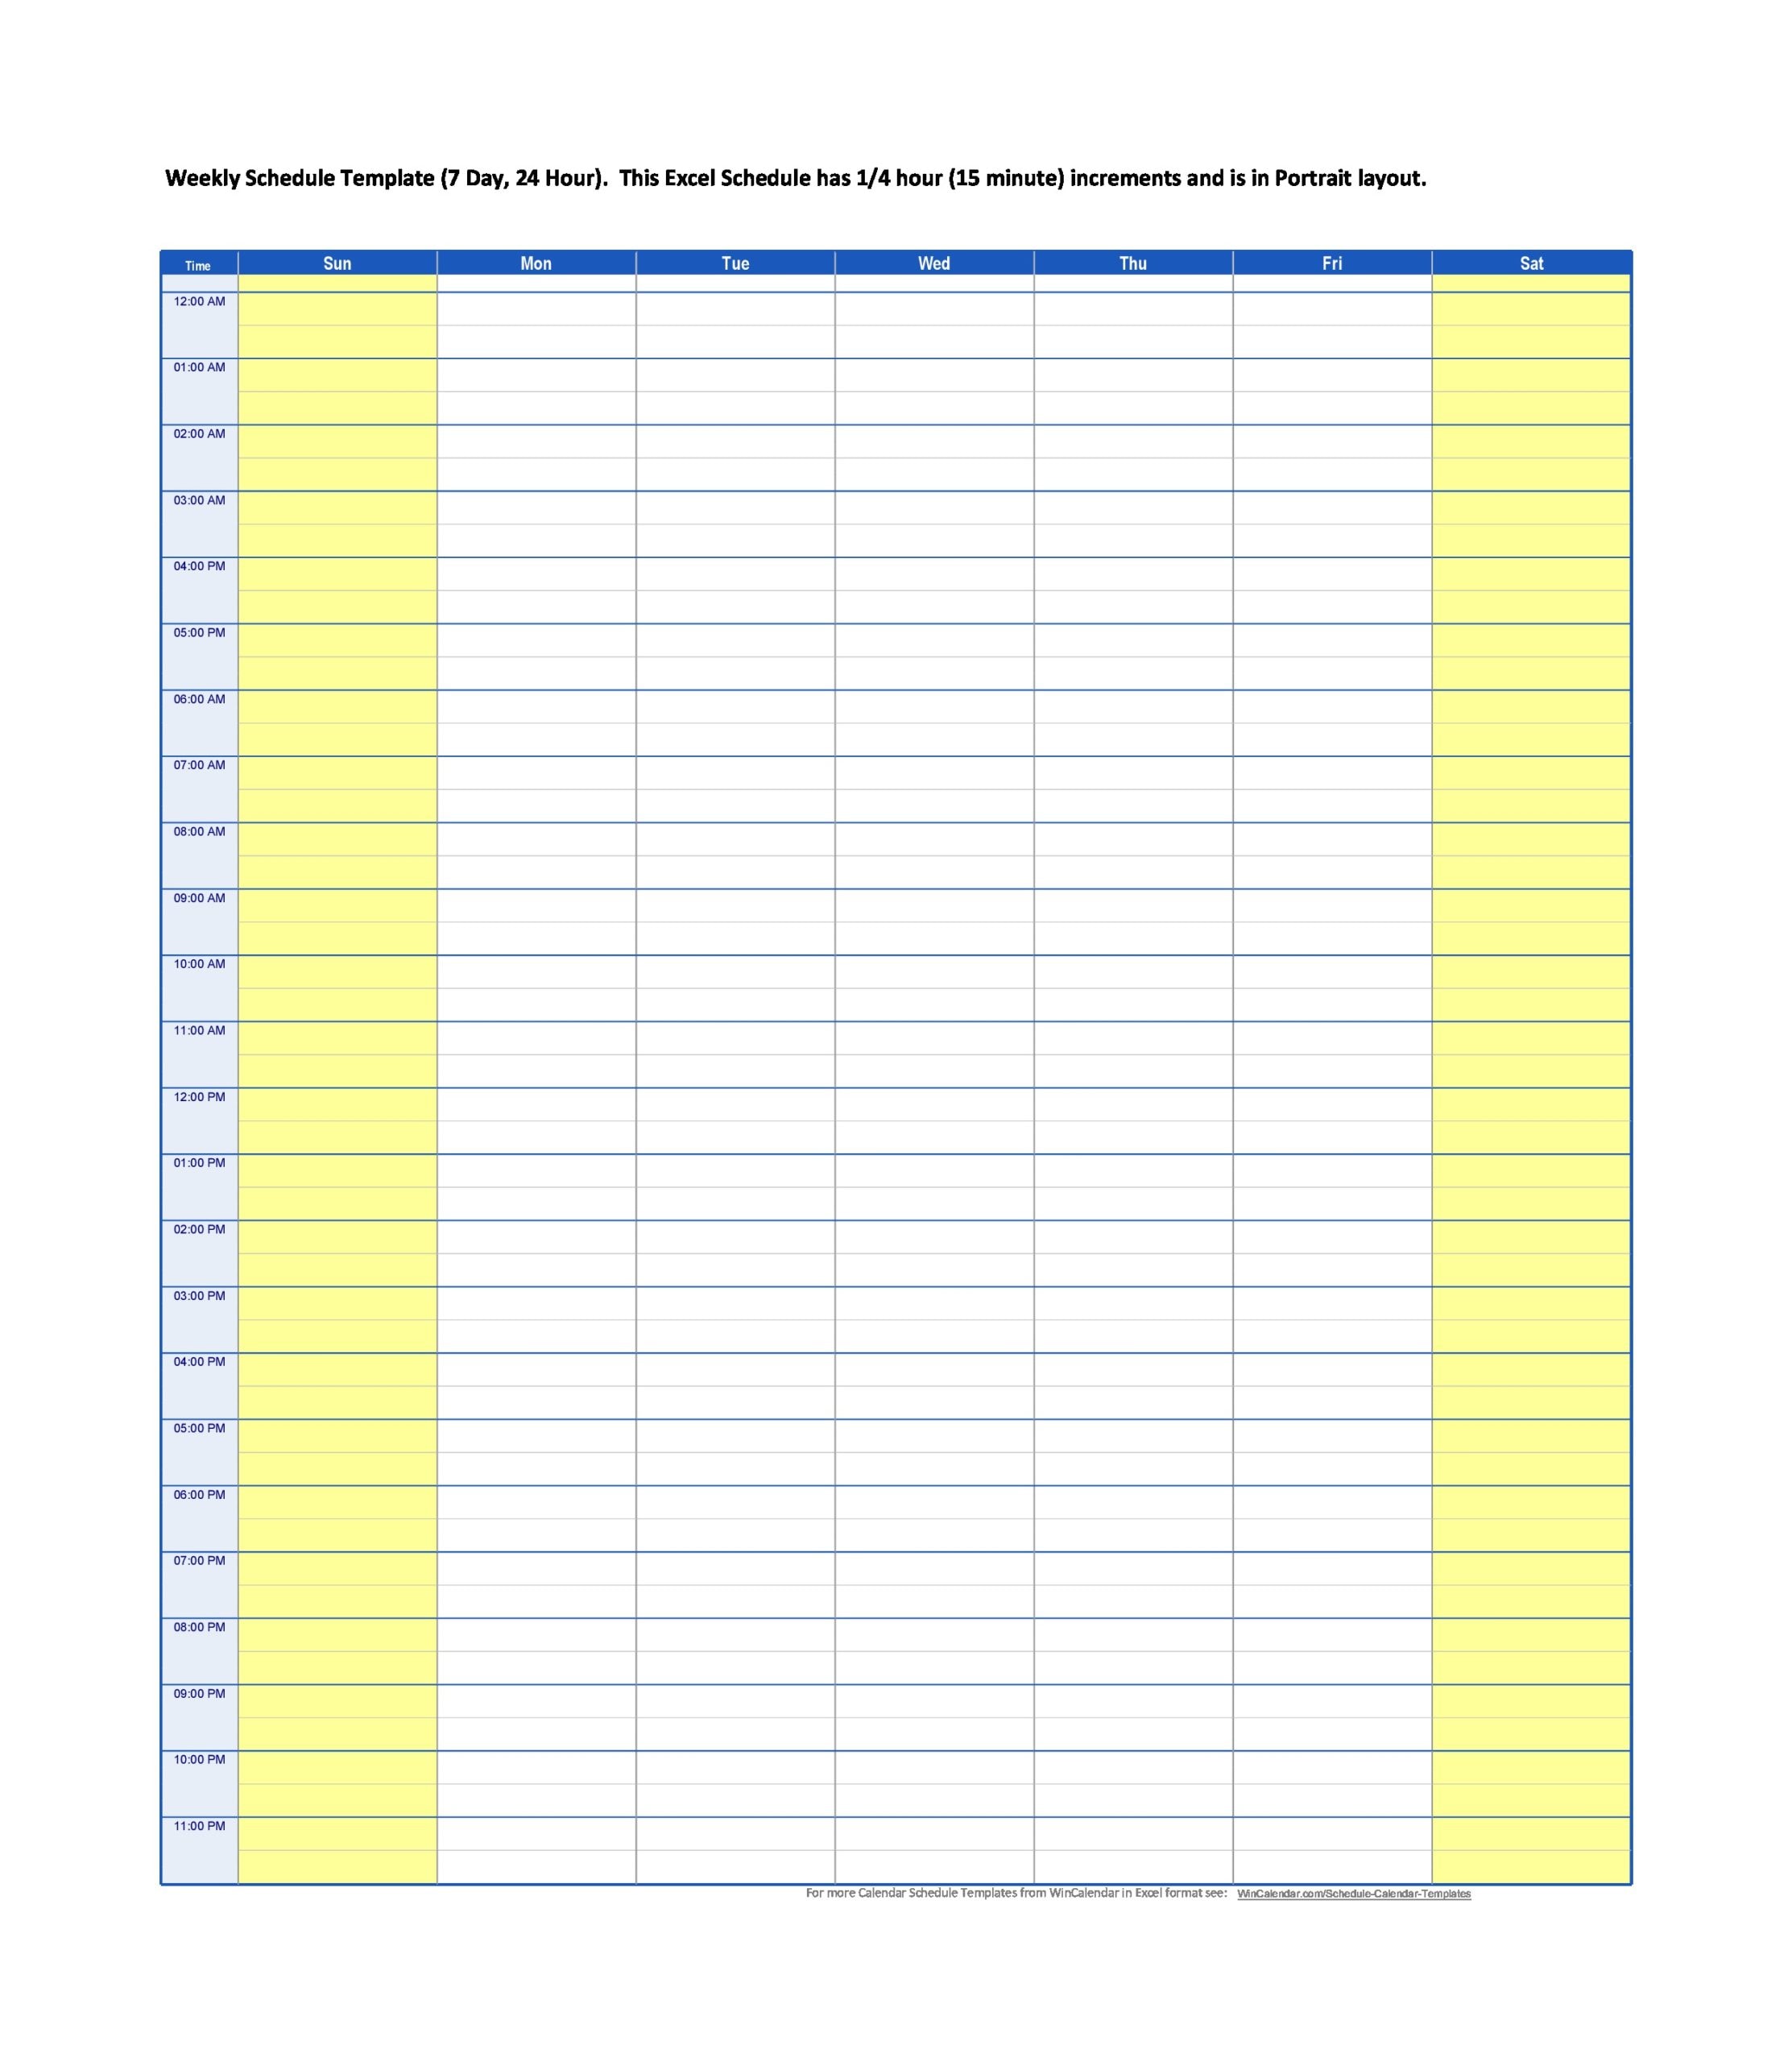 21 Free Weekly Schedule Templates [Excel, Word] - TemplateArchive In Appointment Sheet Template Word